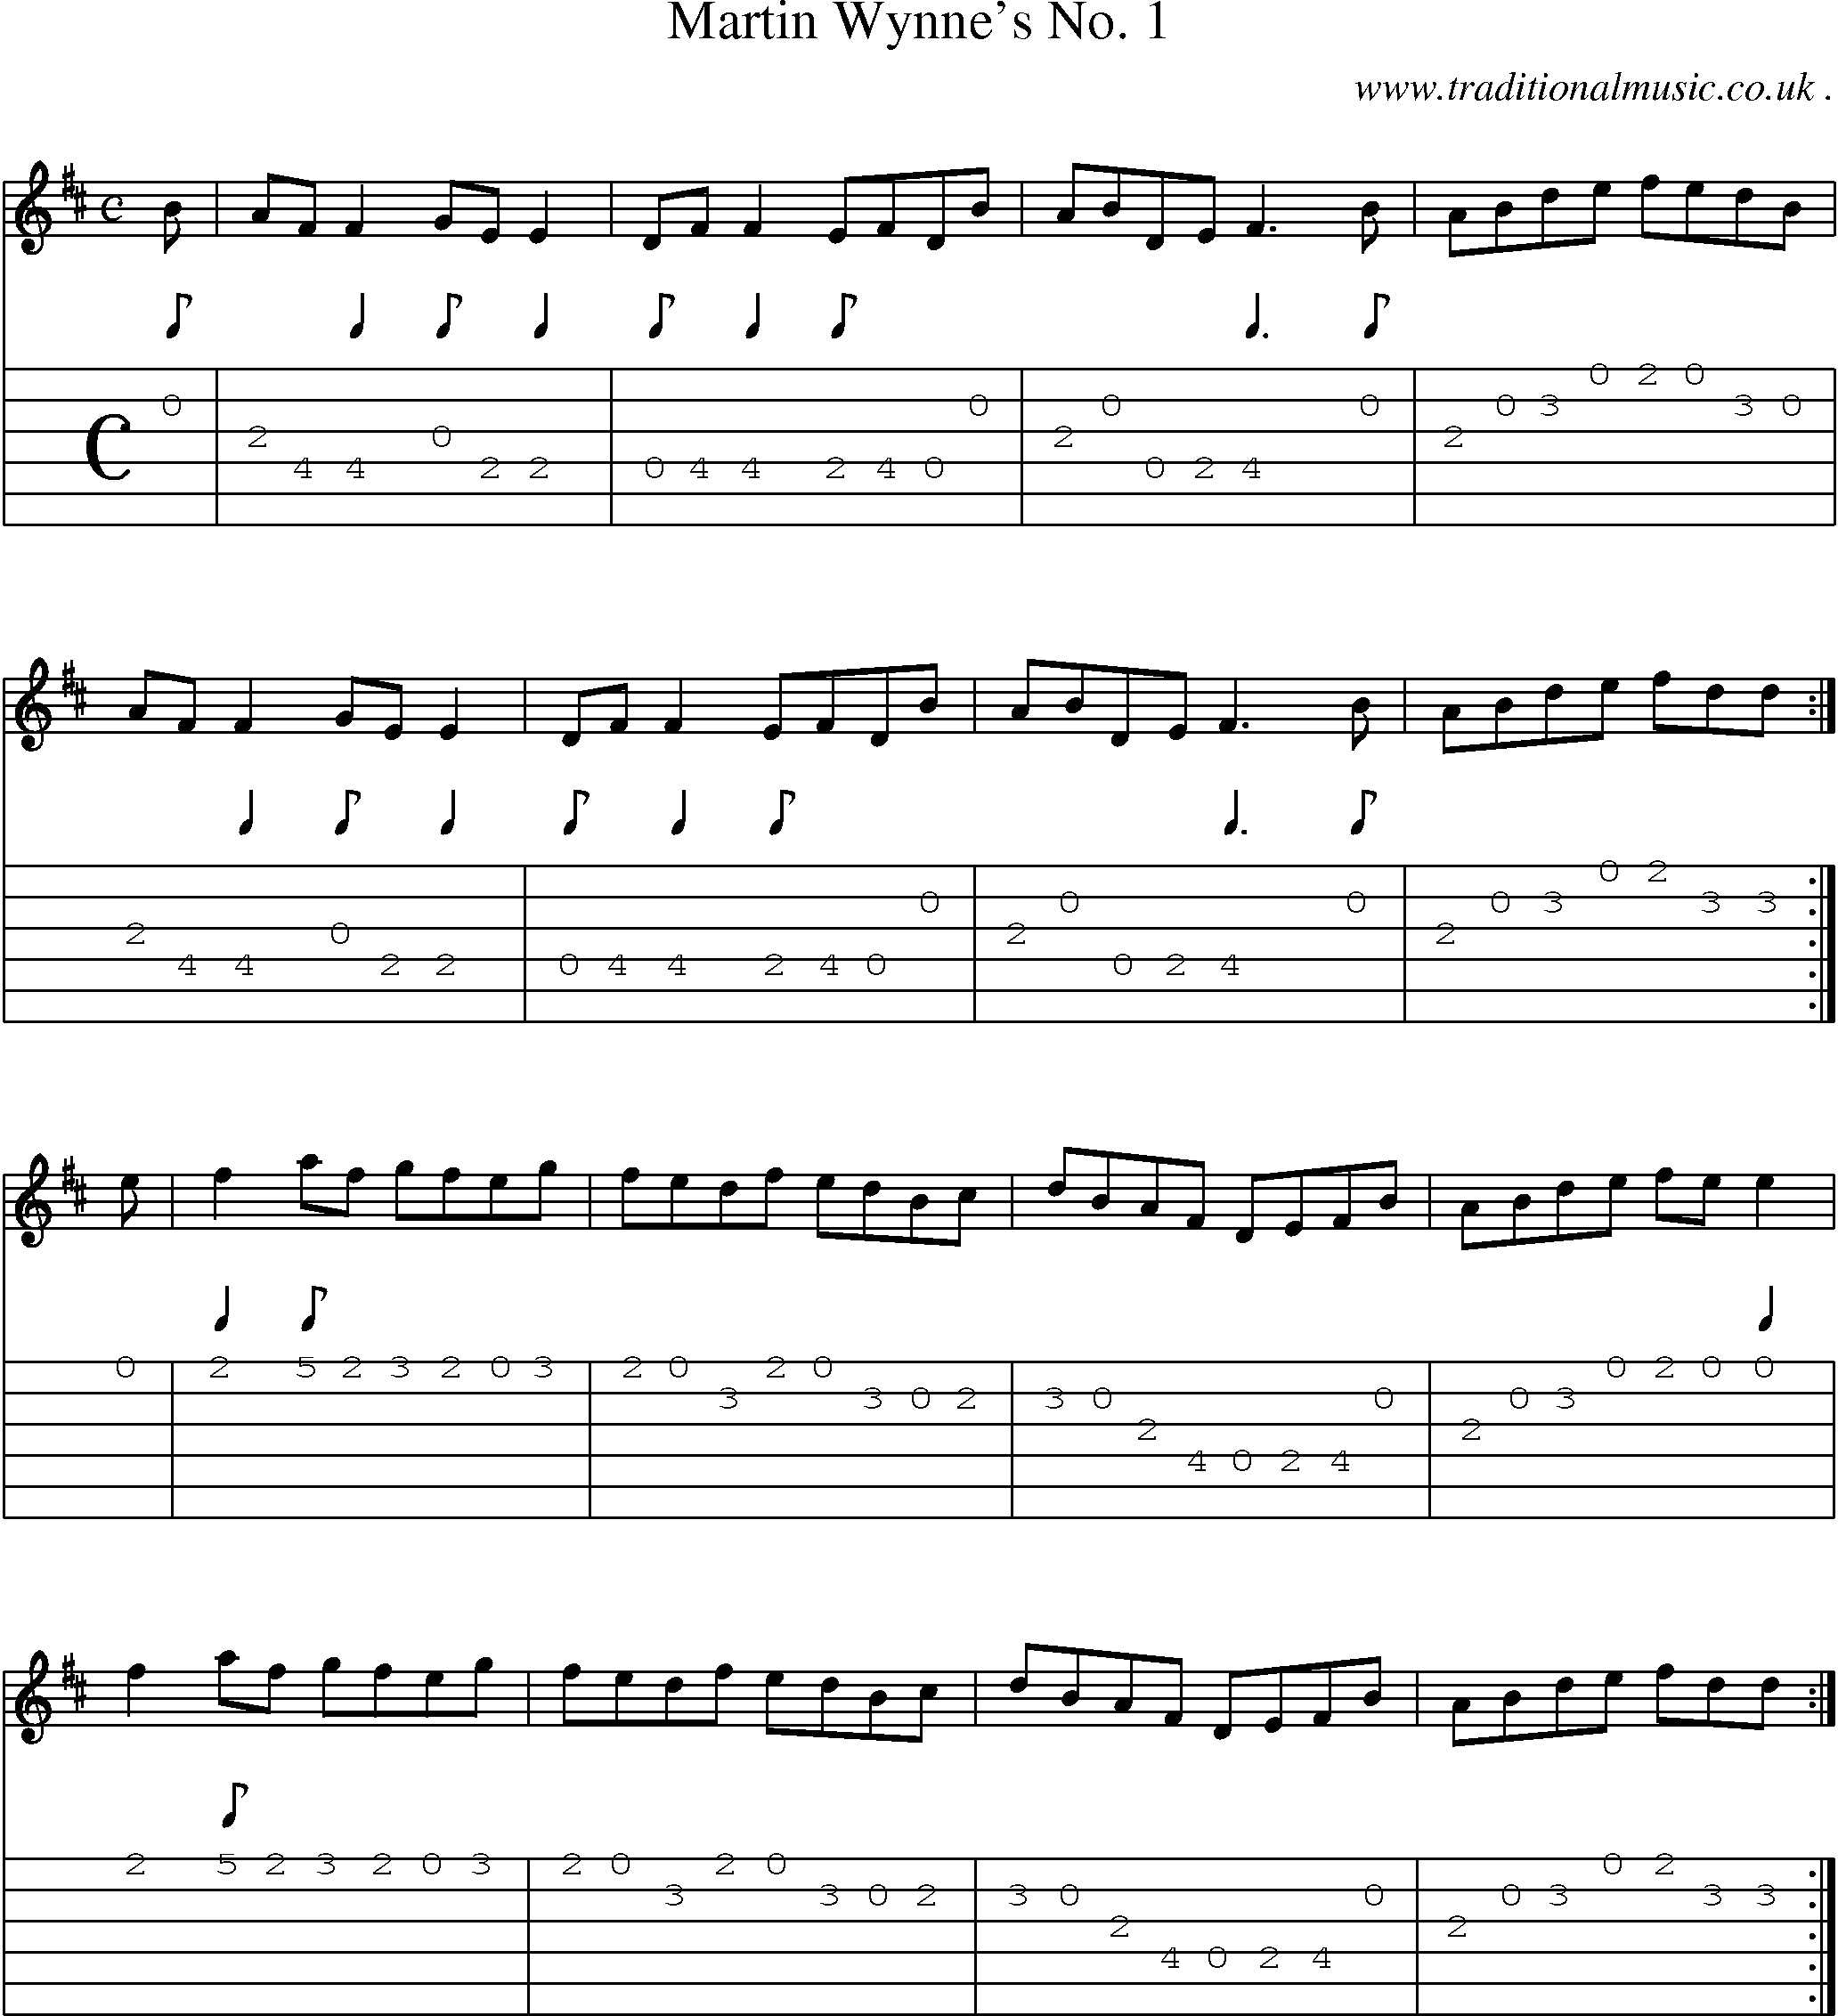 Sheet-Music and Guitar Tabs for Martin Wynnes No 1